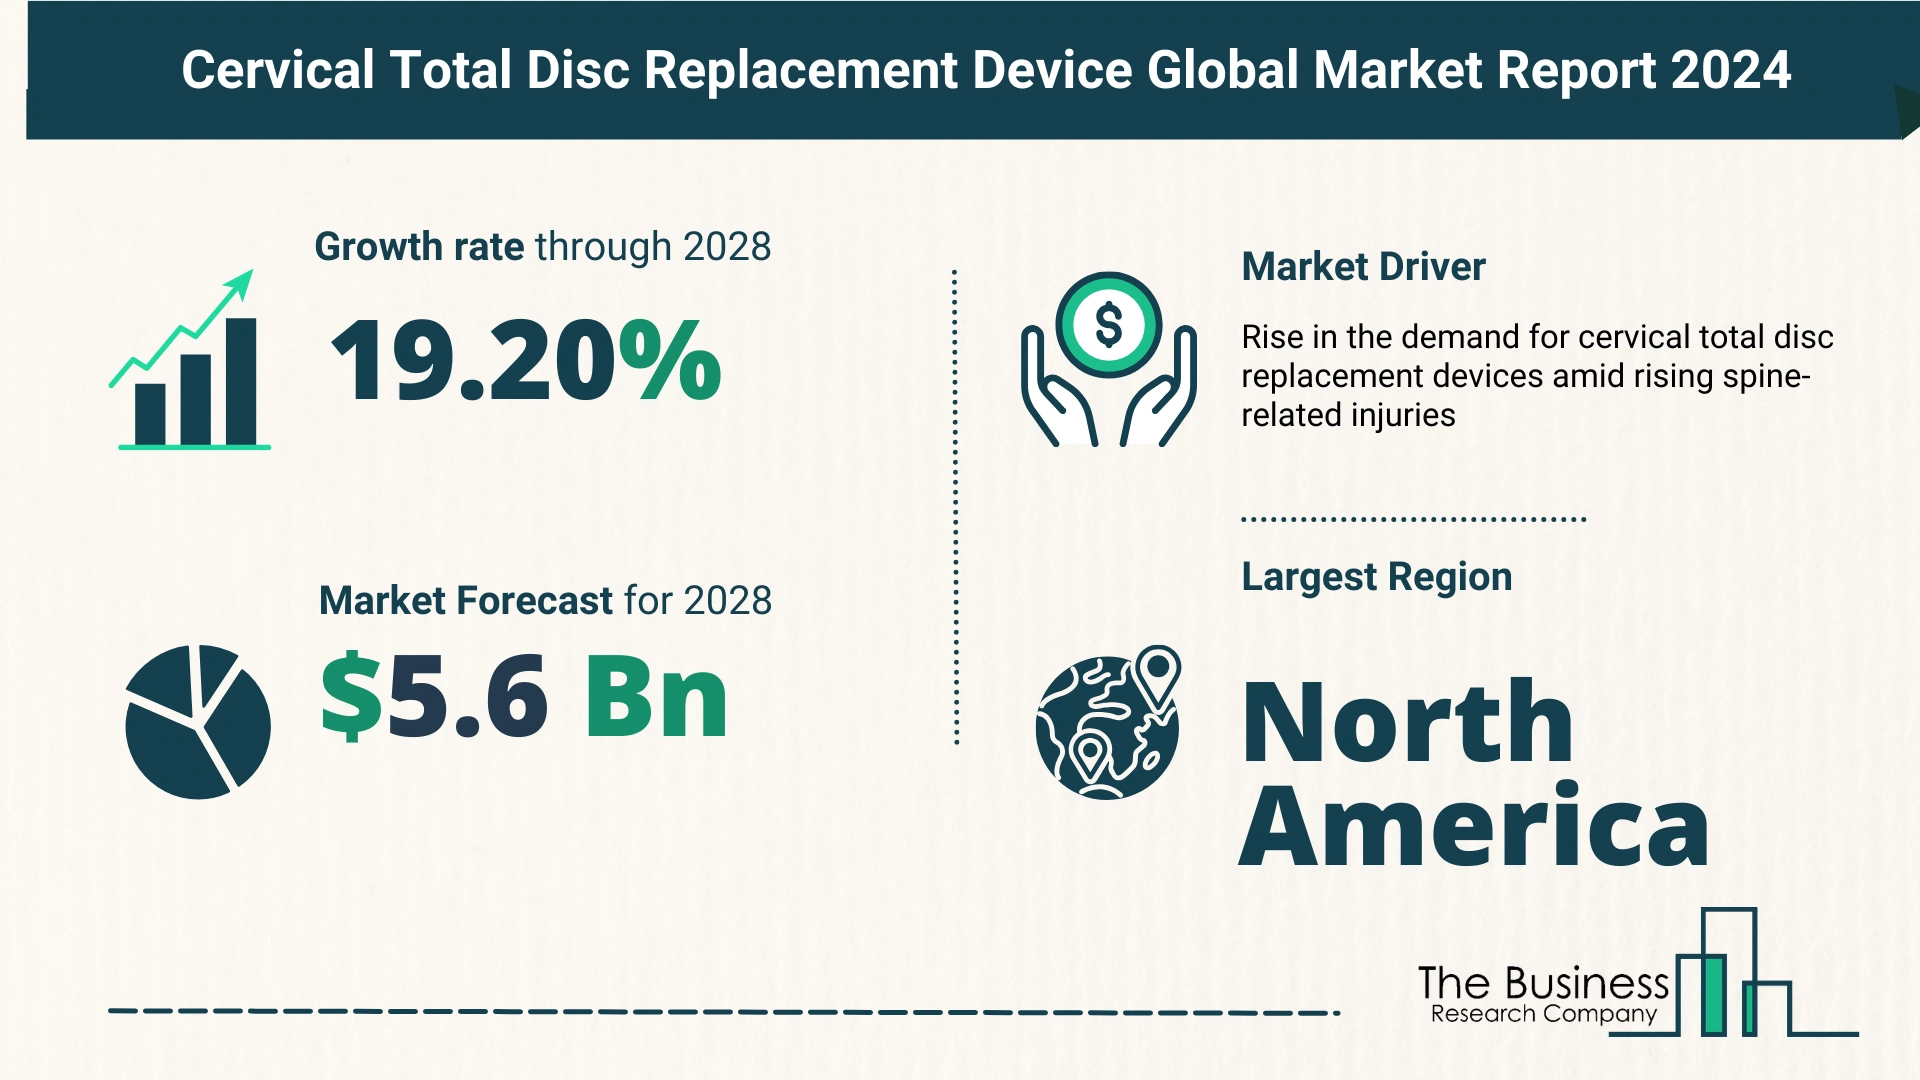 Key Trends And Drivers In The Cervical Total Disc Replacement Device Market 2024